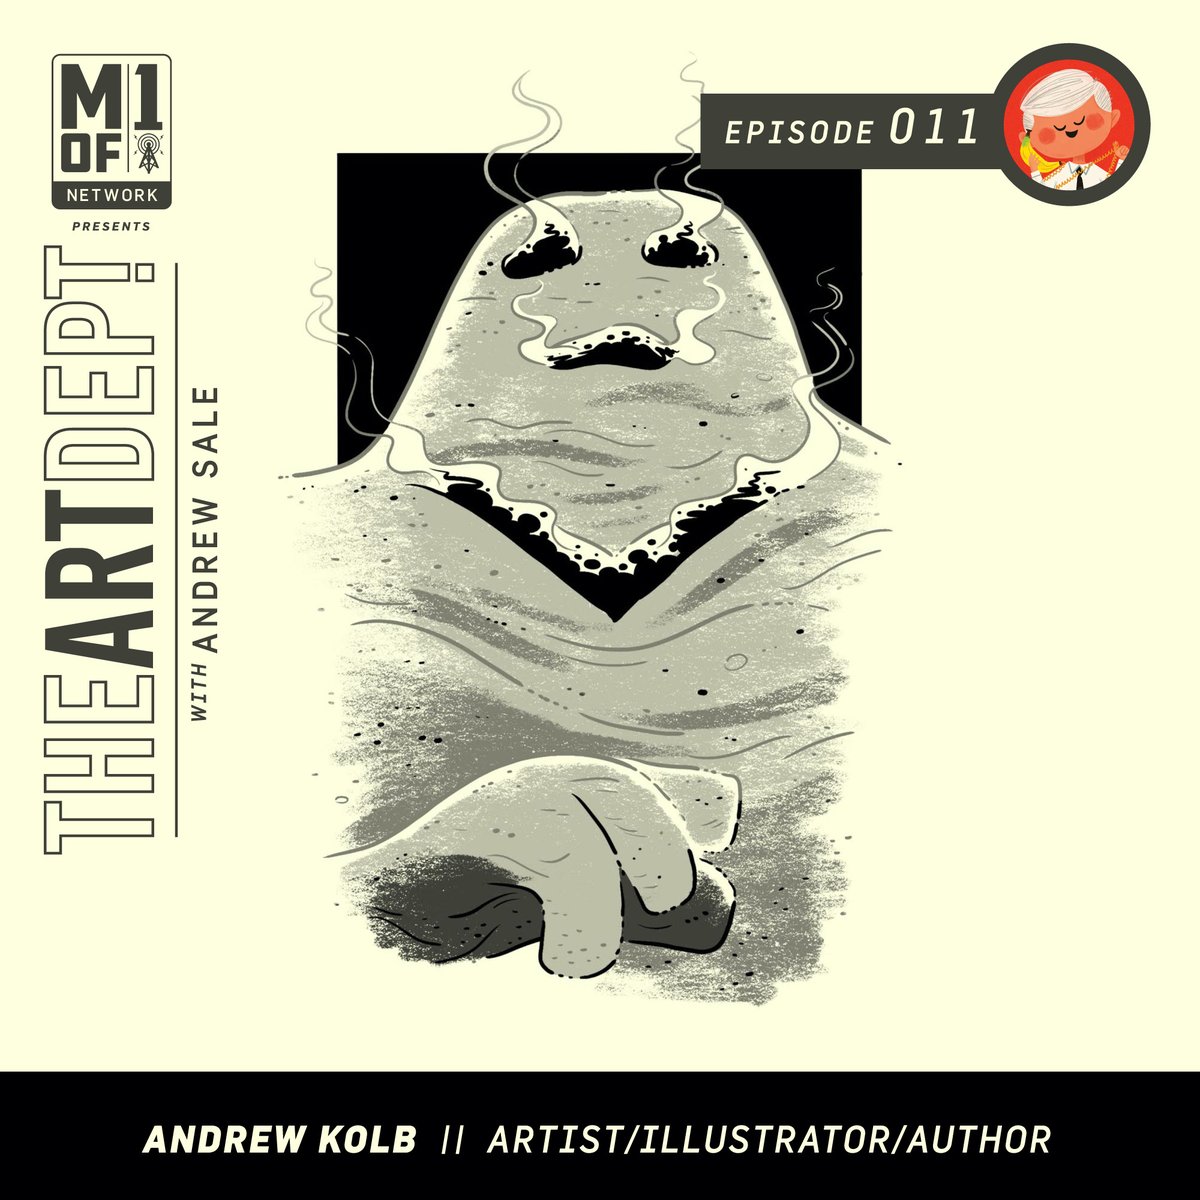 Hey I talk about my new #TTRPG setting in this ep of the @Mof1Podcast with @Andr3wSal3!
https://t.co/tvNmBOyvEf
I...uh...wasn't prepared for how much art goes into a D&D type book. 